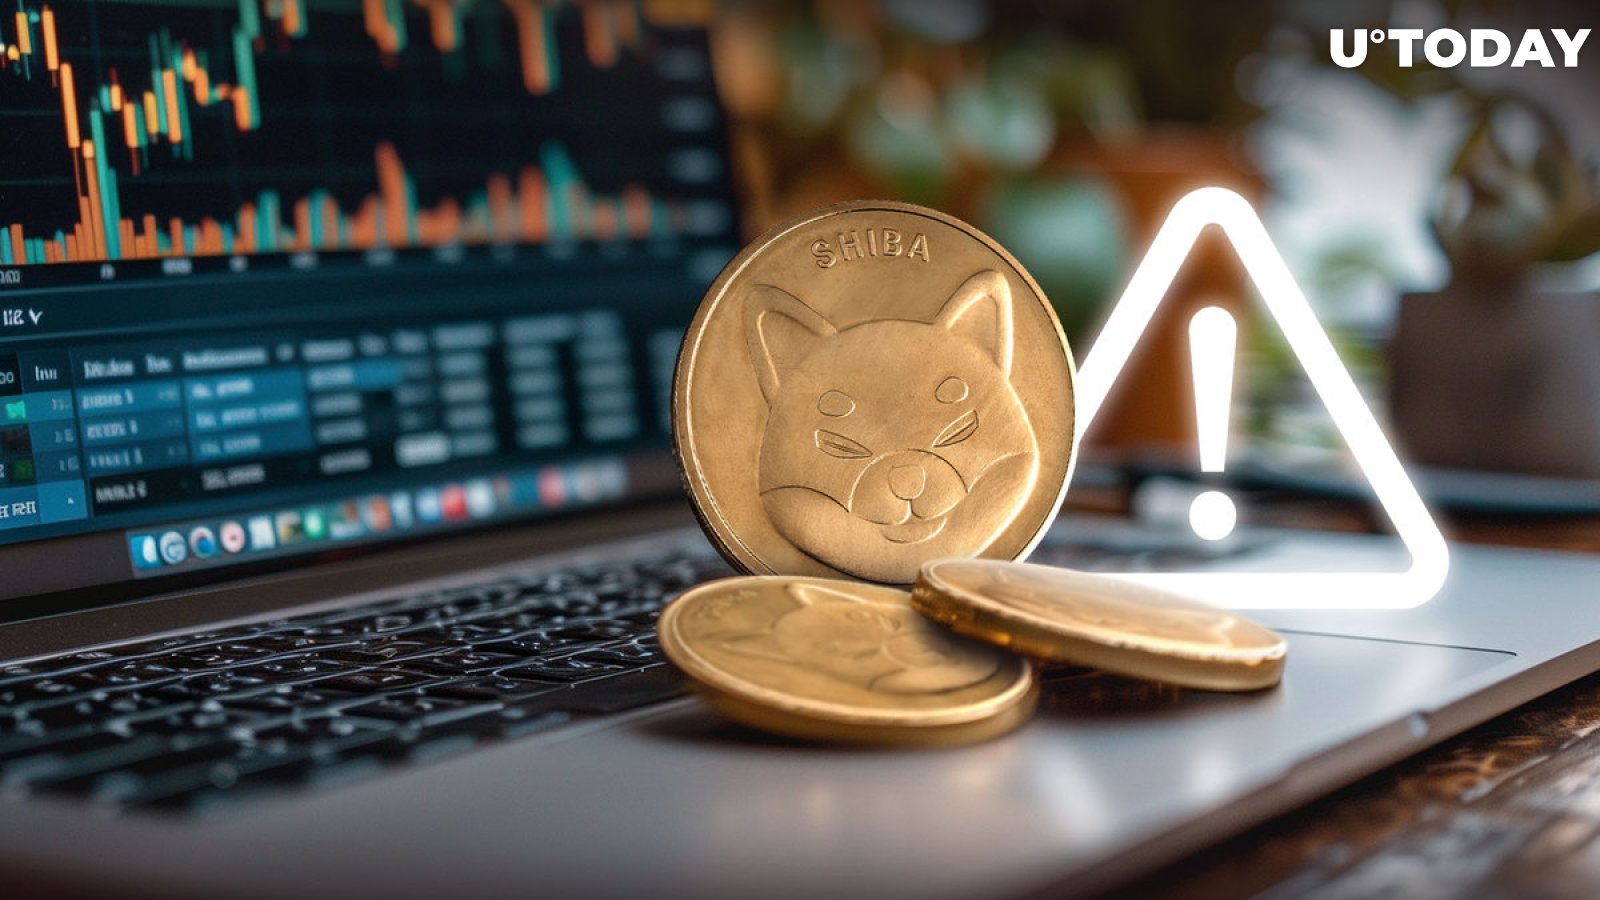 Shiba Inu Issues Important Wallet Alert for All SHIB Holders